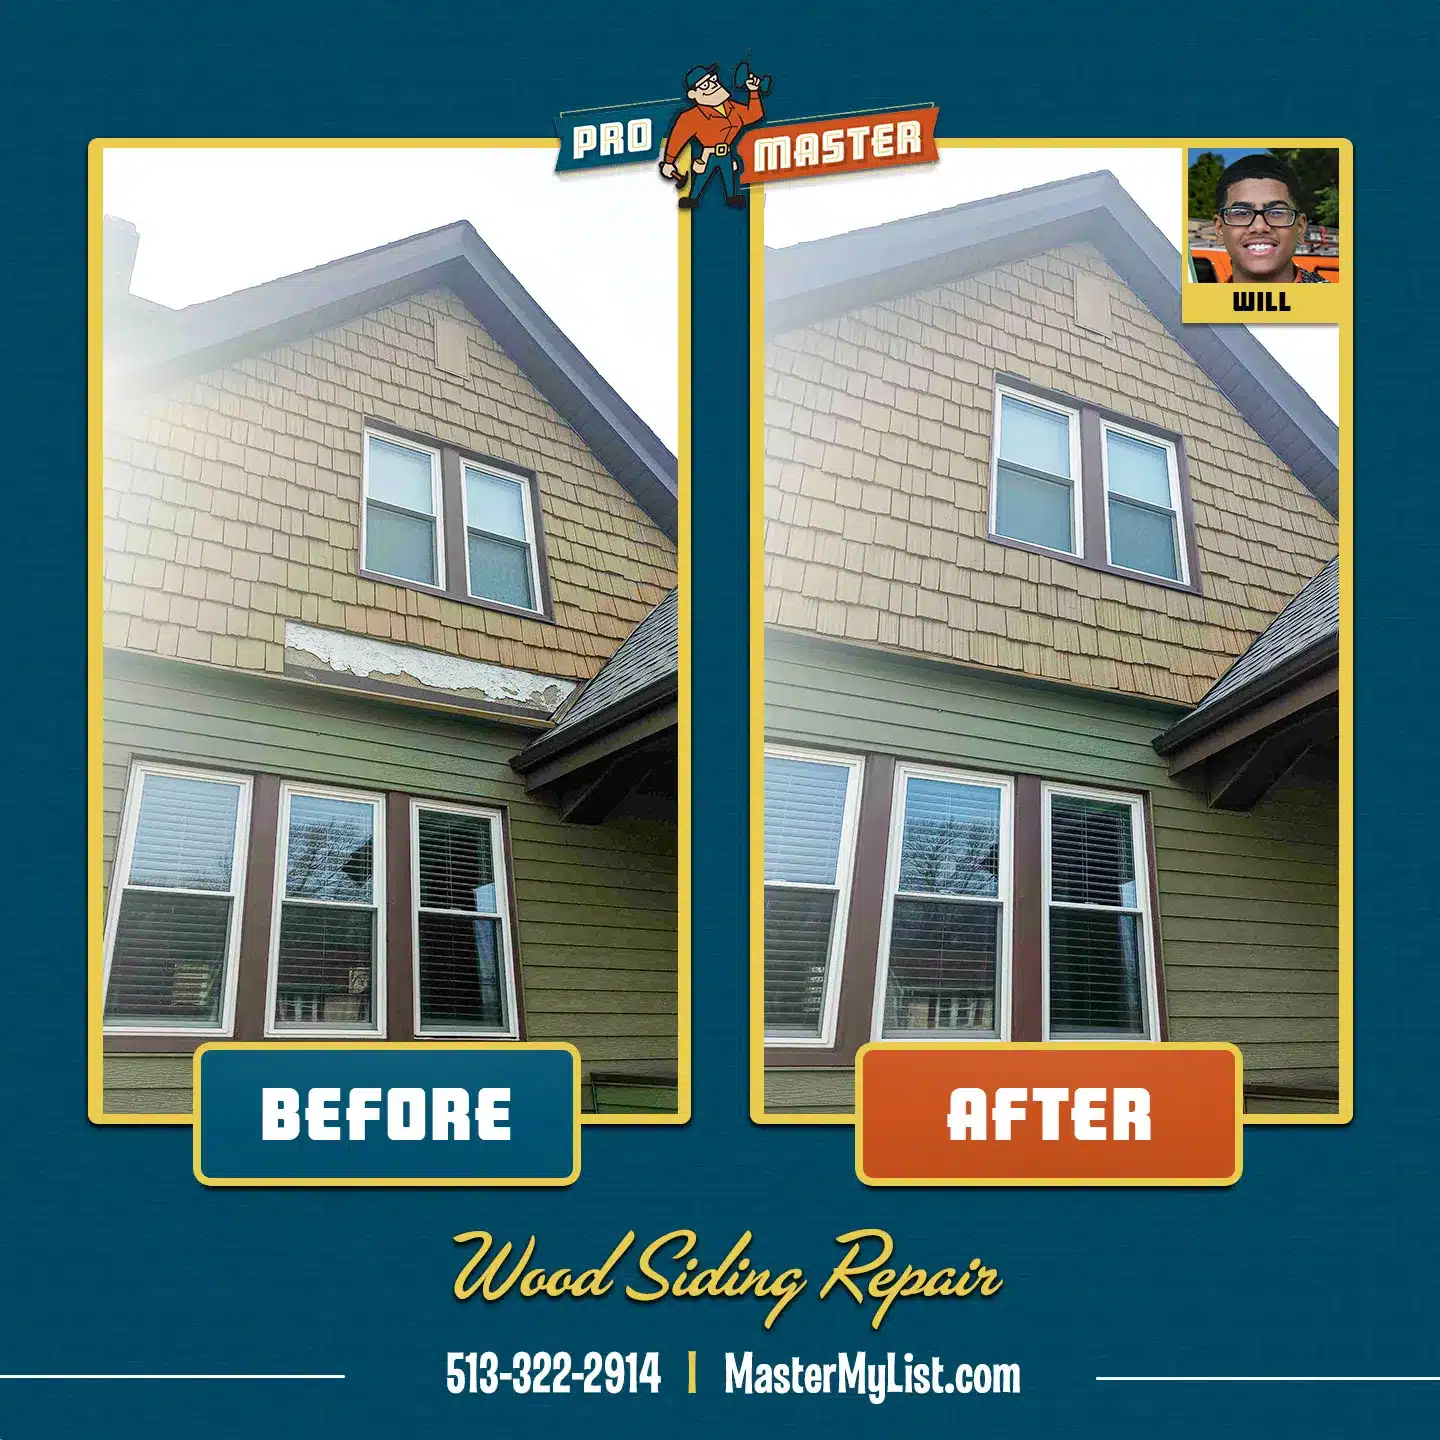 Before and after picture of wood siding repair completed by ProMaster craftsman.